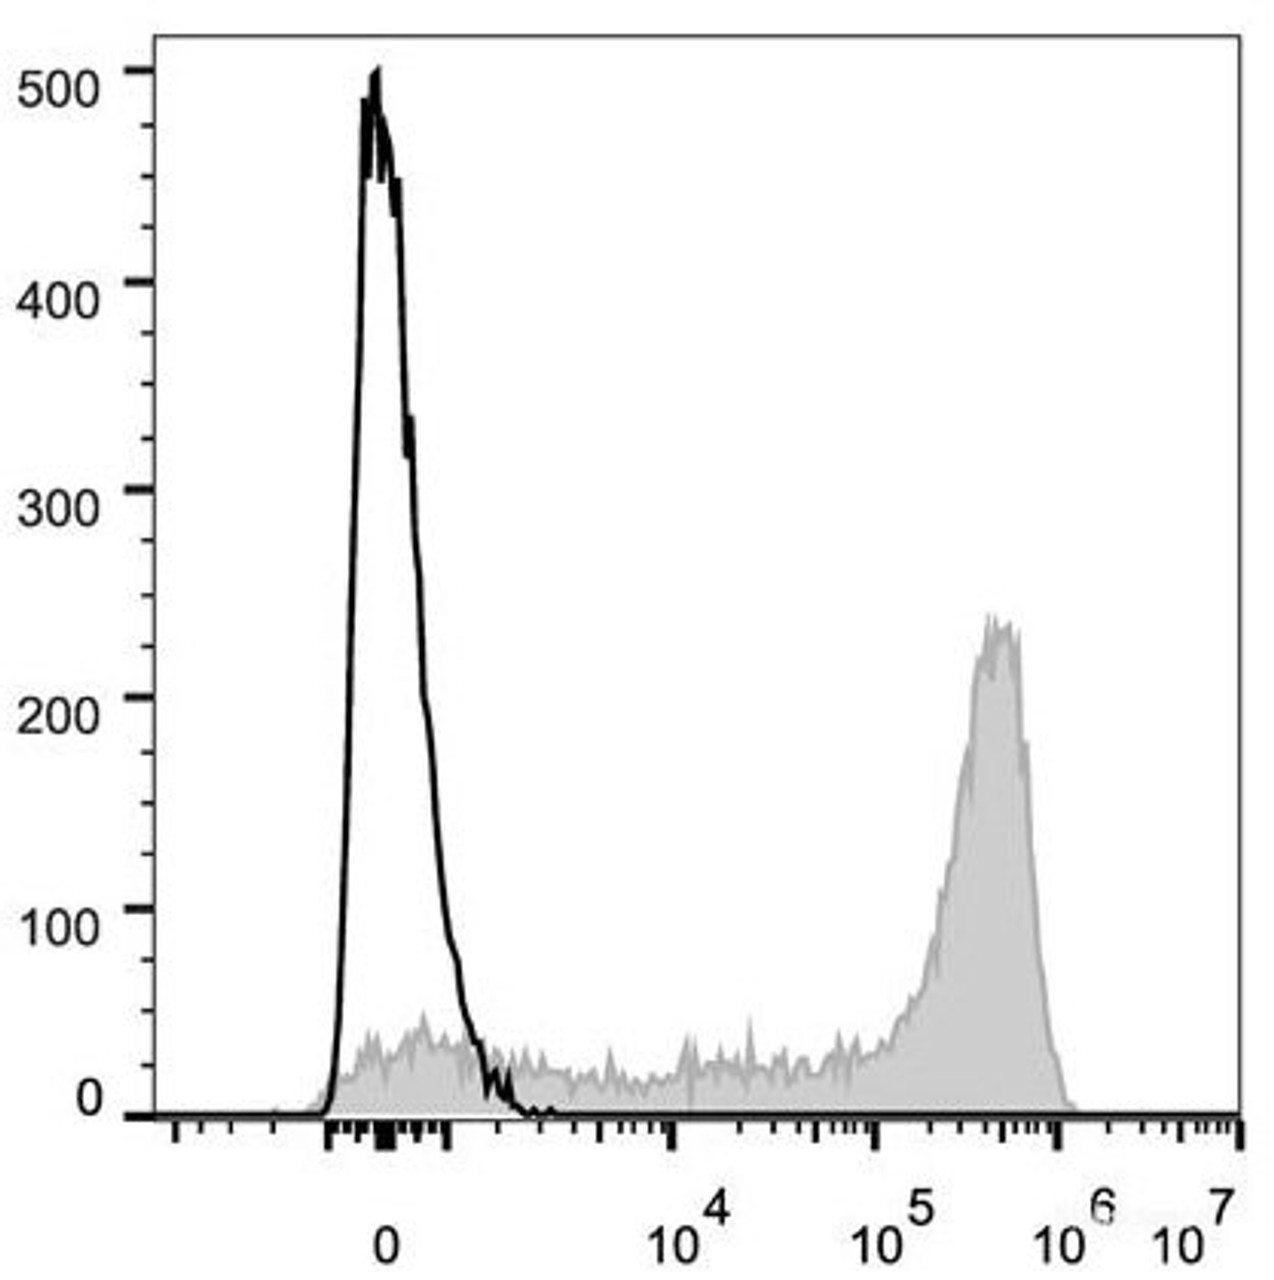 Human peripheral blood lymphocytes are stained with AF647 Anti-Human CD45RA Antibody(filled gray histogram). Unstained lymphocytes (empty black histogram) are used as control.